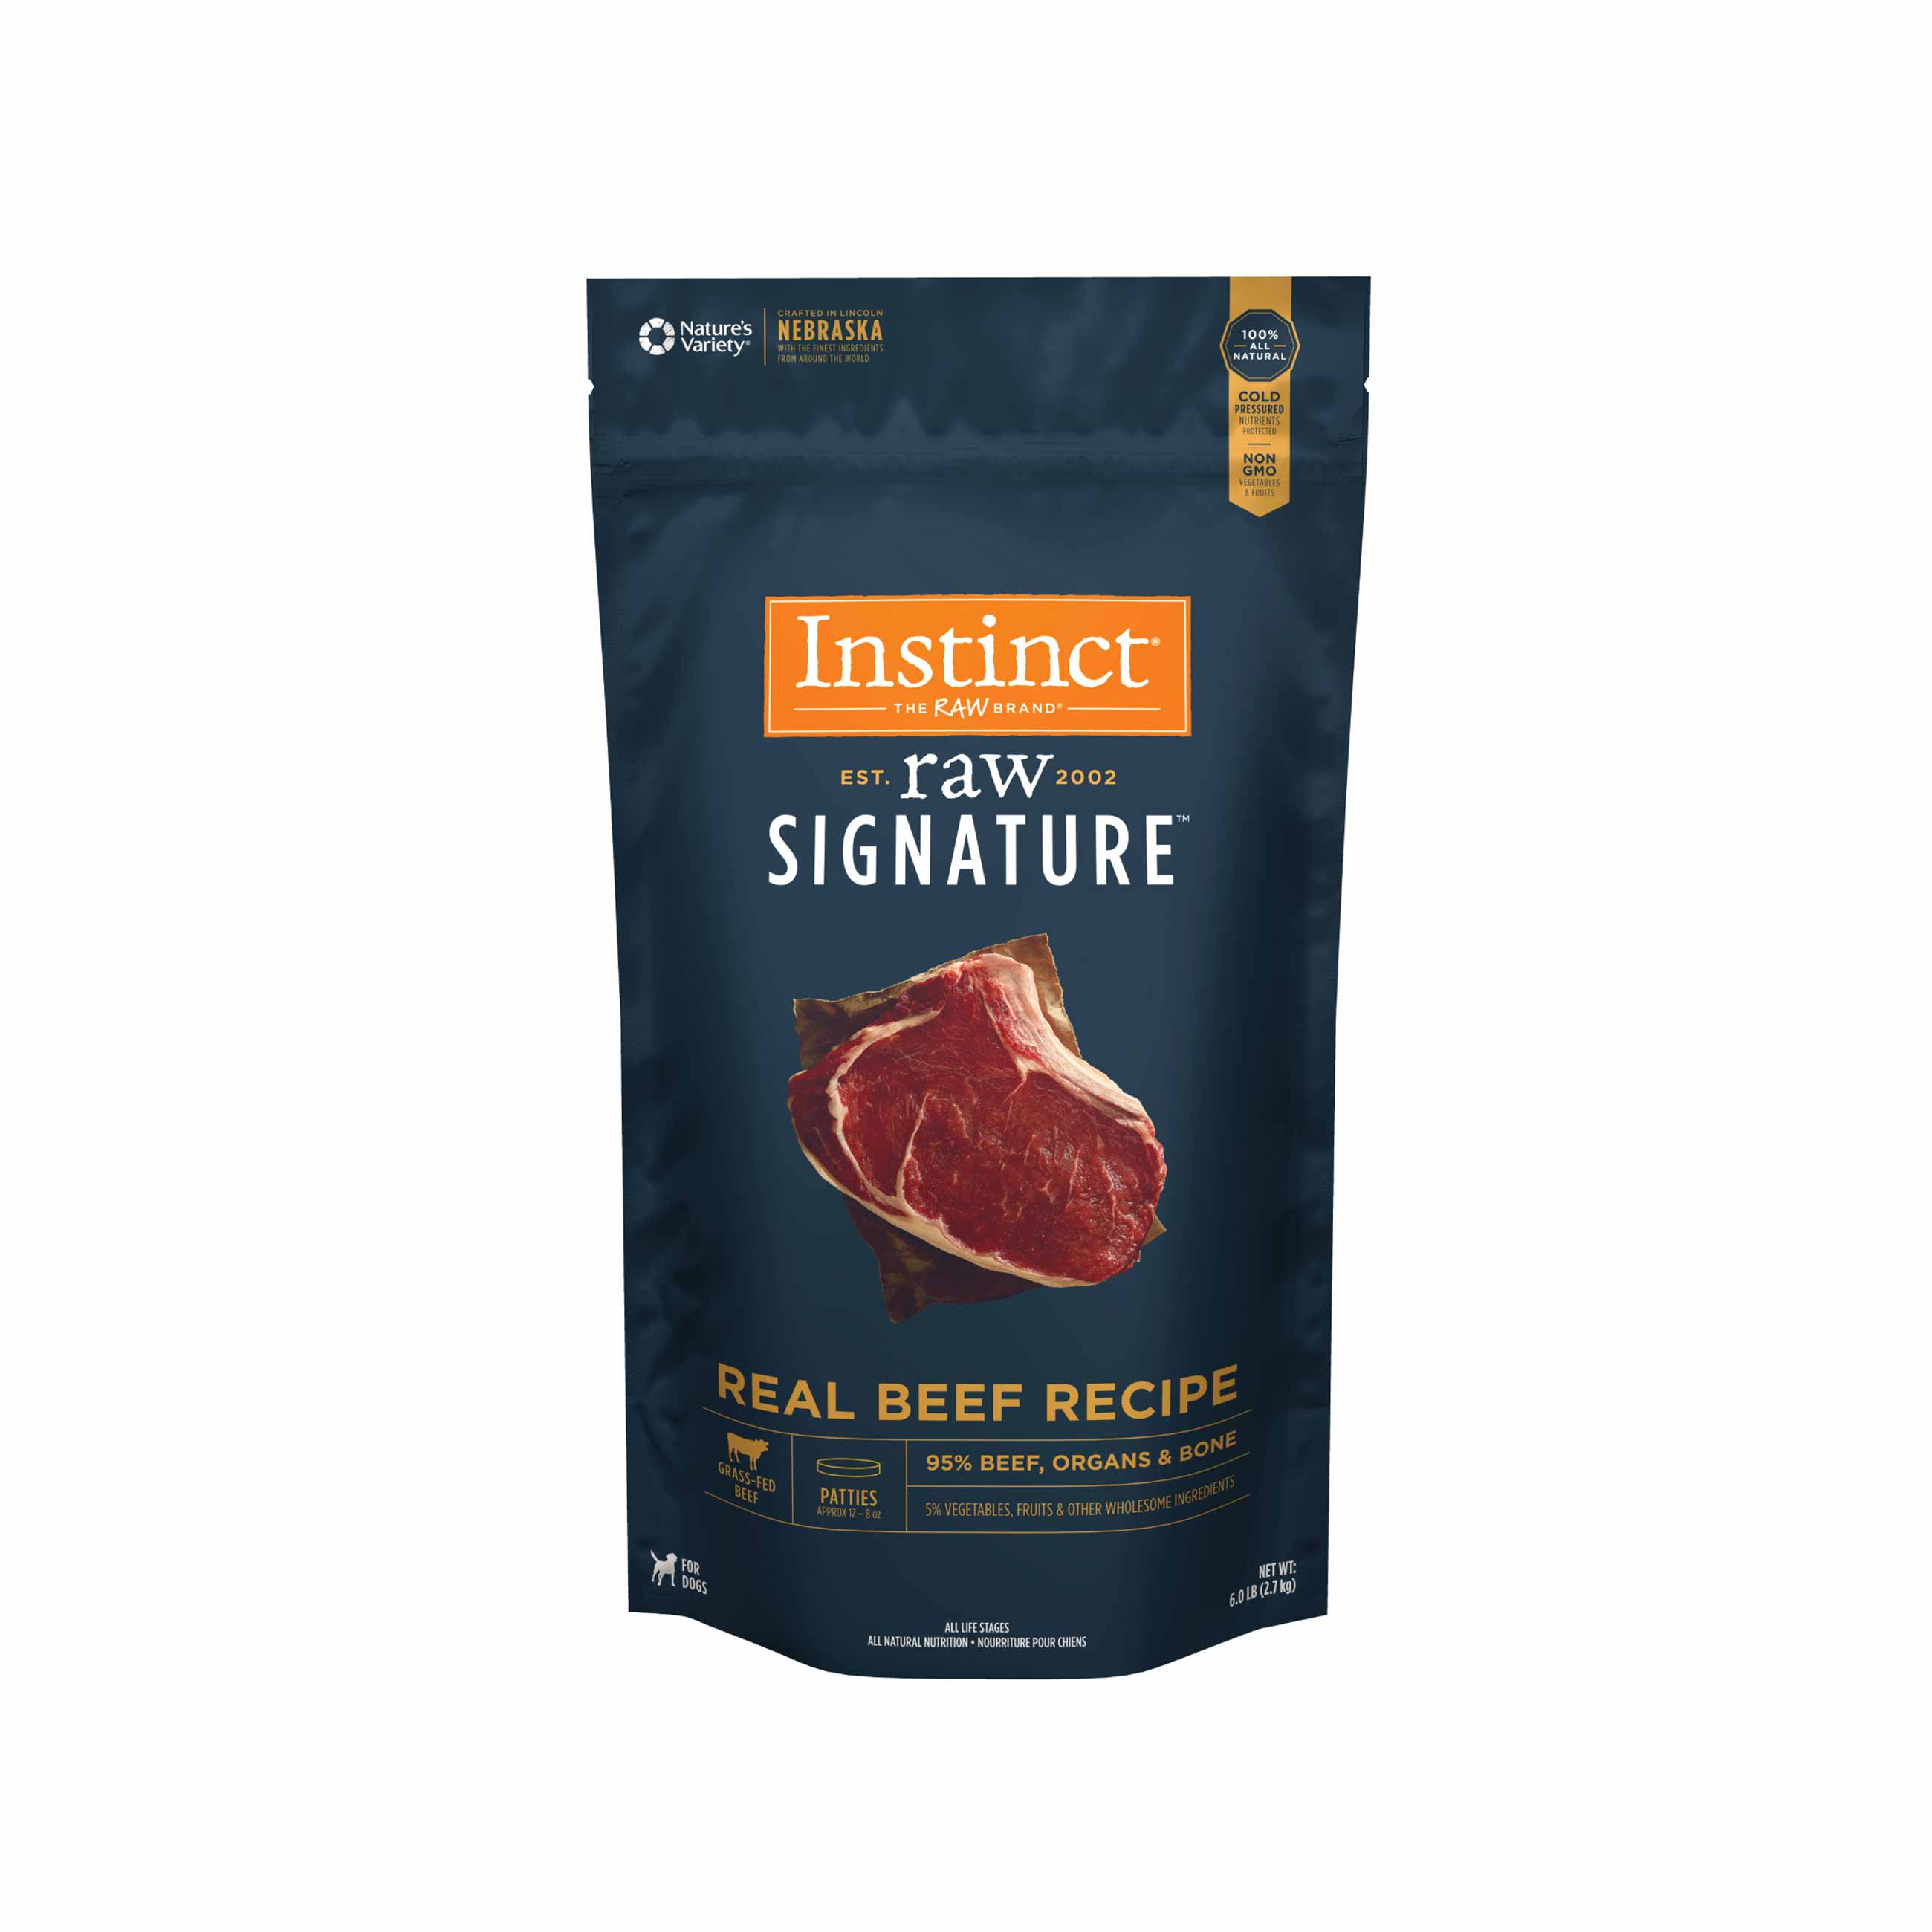 Instinct Frozen Raw Signature Patties Grain-Free Real Beef Recipe Dog Food, 6 Pound Bag - Not Available for Delivery